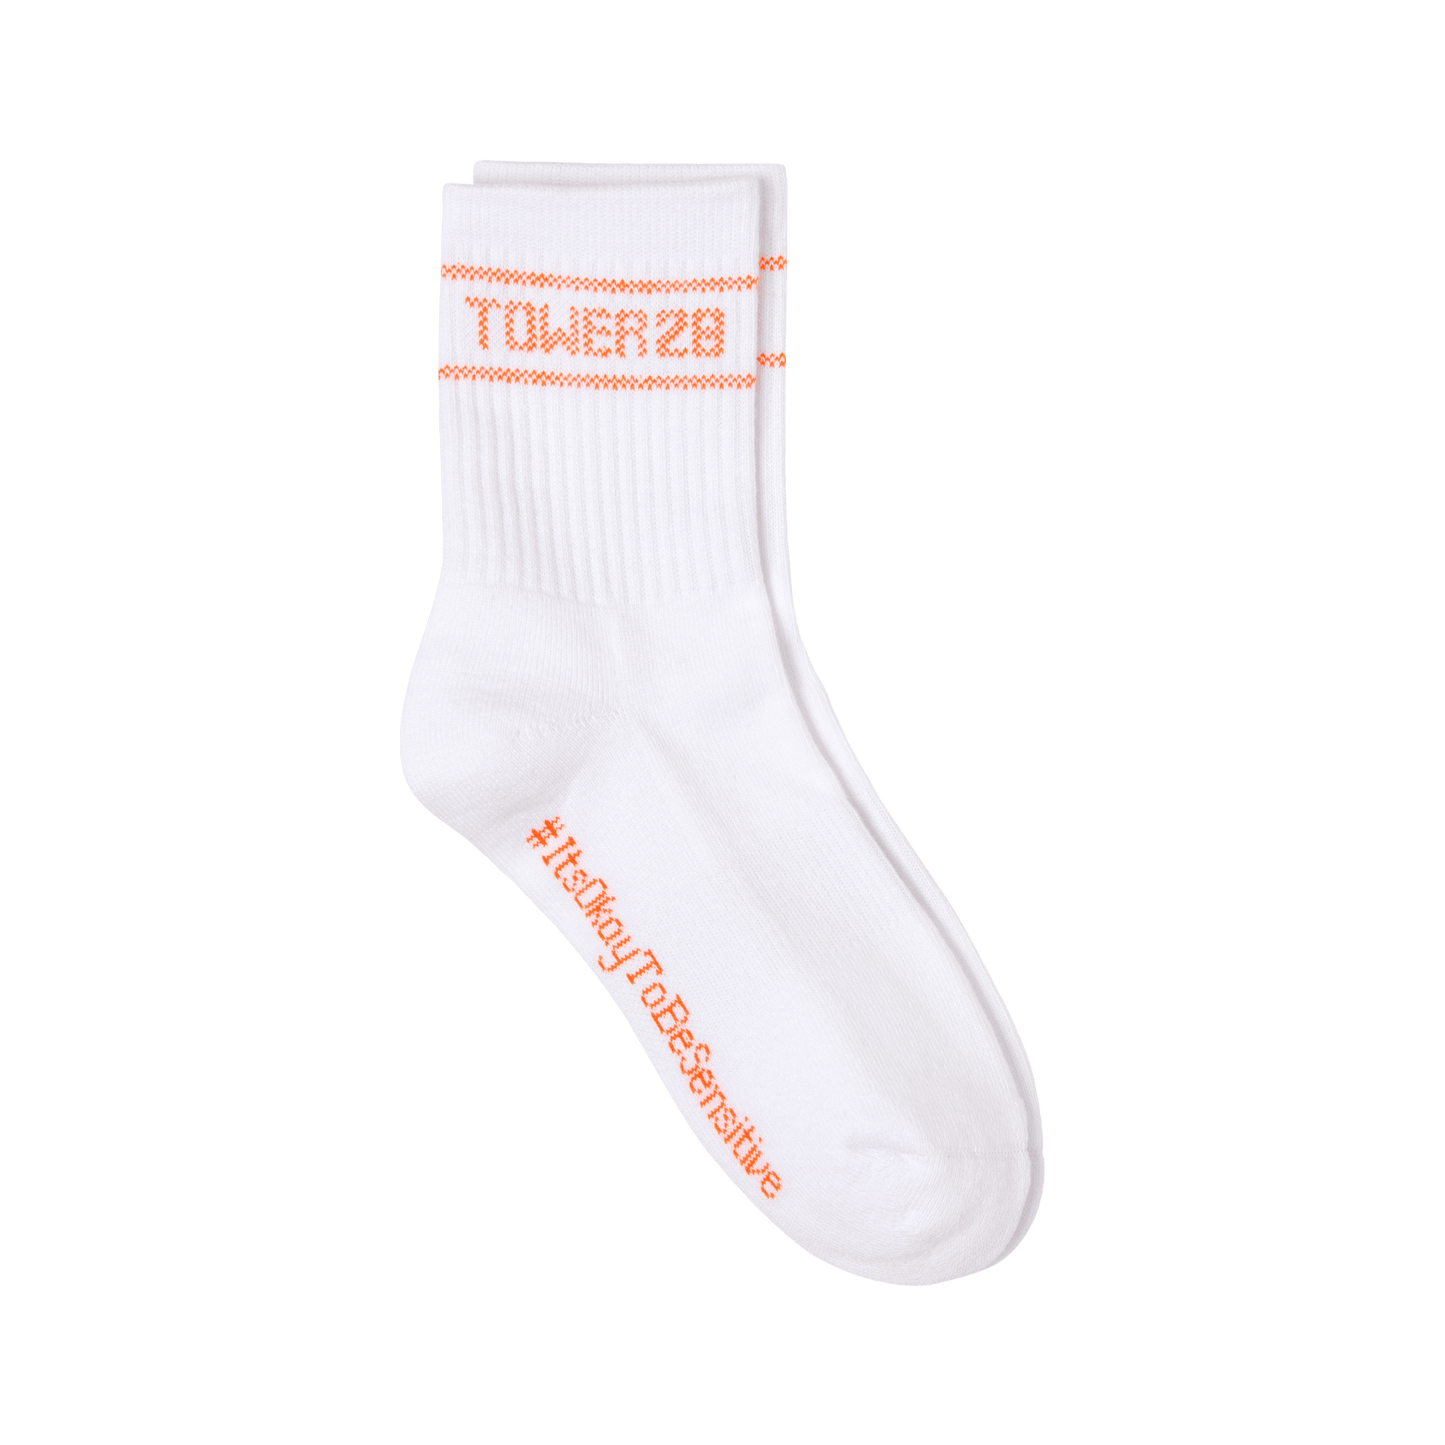 [Shared: A pair of Tower 28 Beauty's white crew socks designed with orange cross stiching that says "Tower 28" and "#ItsOkayToBeSensitive"]